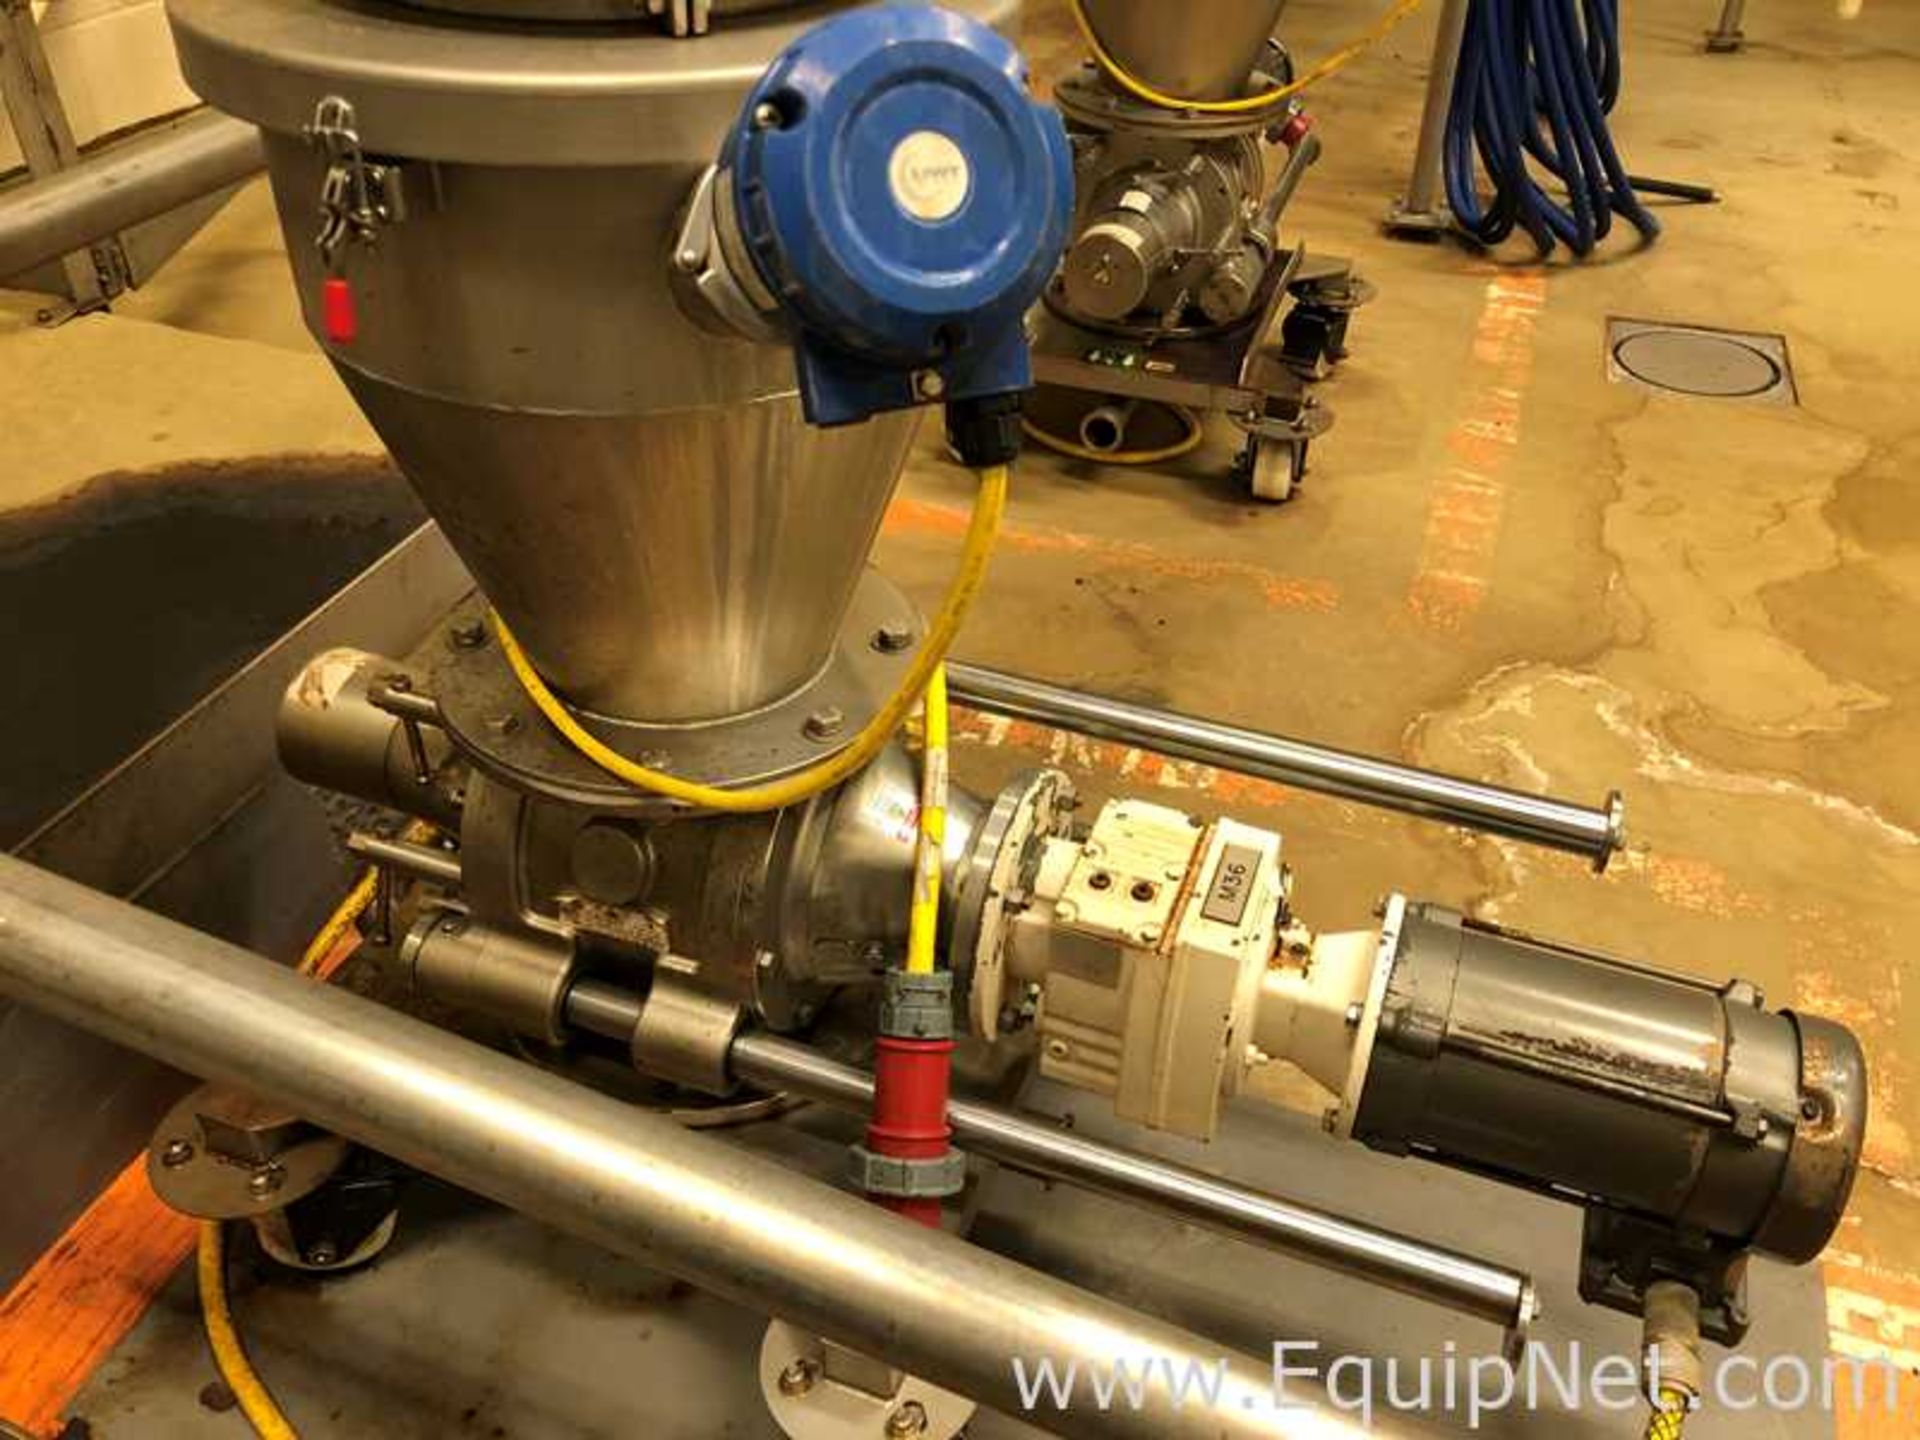 One Vacuum Conveyor System Vac-U-Max With Hopper And One Rotary Valve - Image 4 of 10